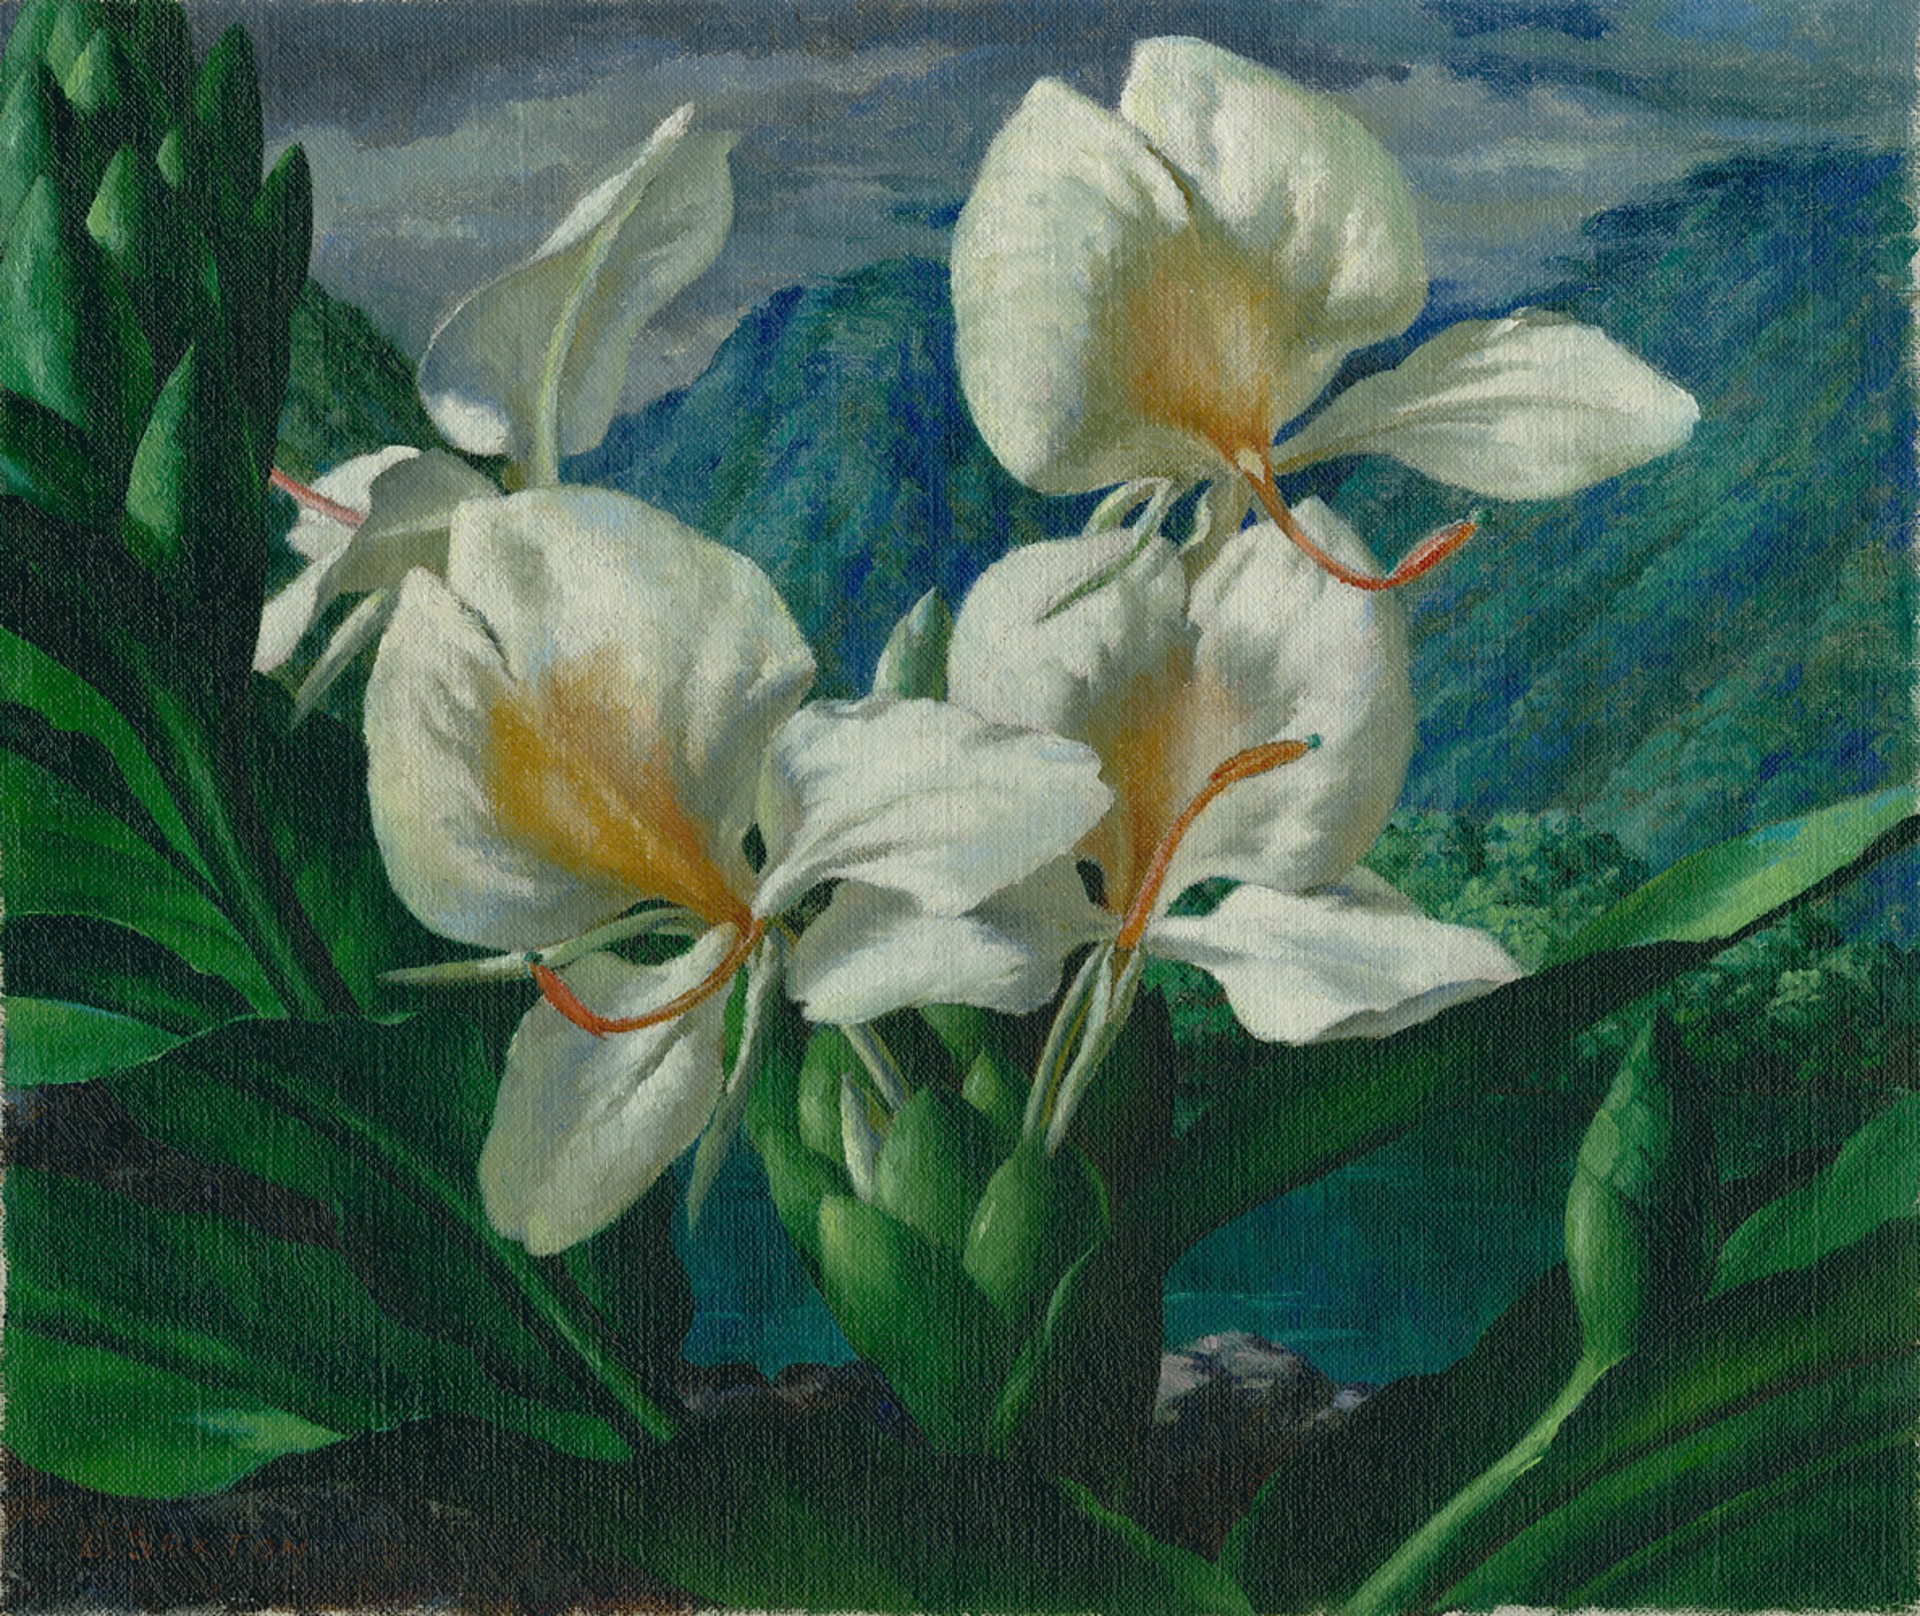 White Ginger in Waipi'o Valley by Leo Lloyd Sexton